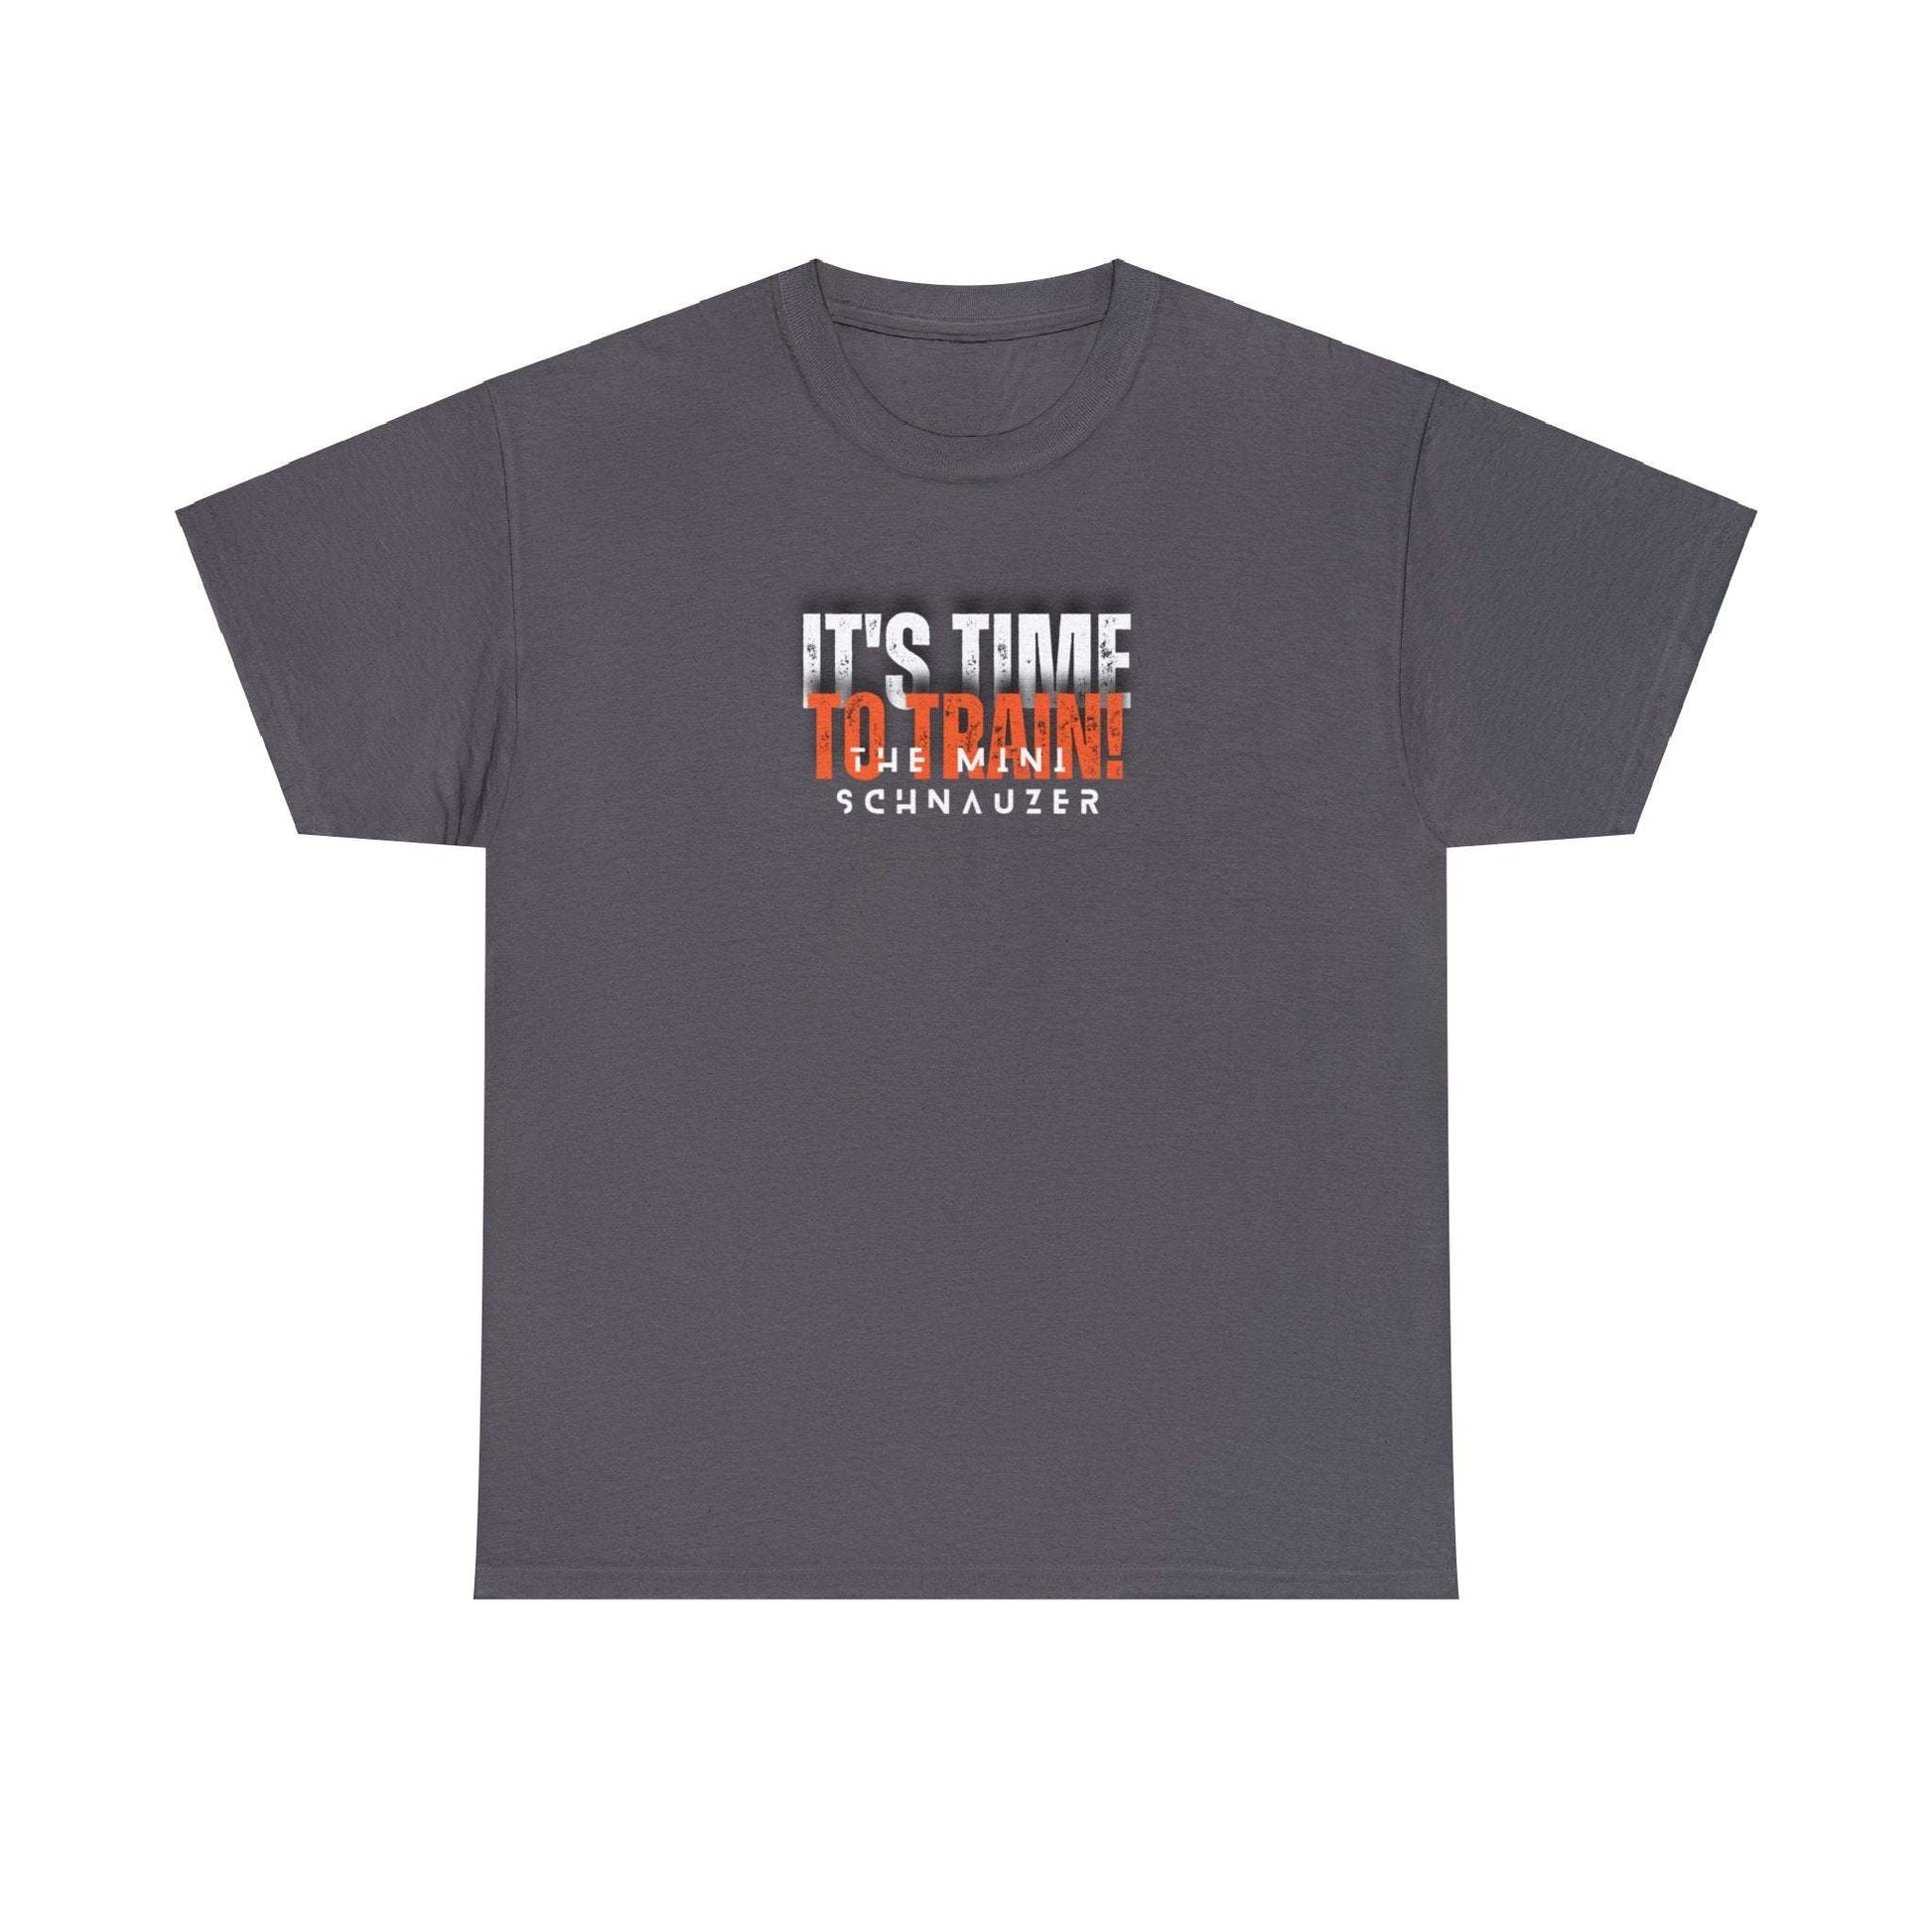 Fabulous Tee Shirts' 'Its Time To Train The Mini Schnauzer' grey t-shirt displayed to emphasize its unique design and premium quality.